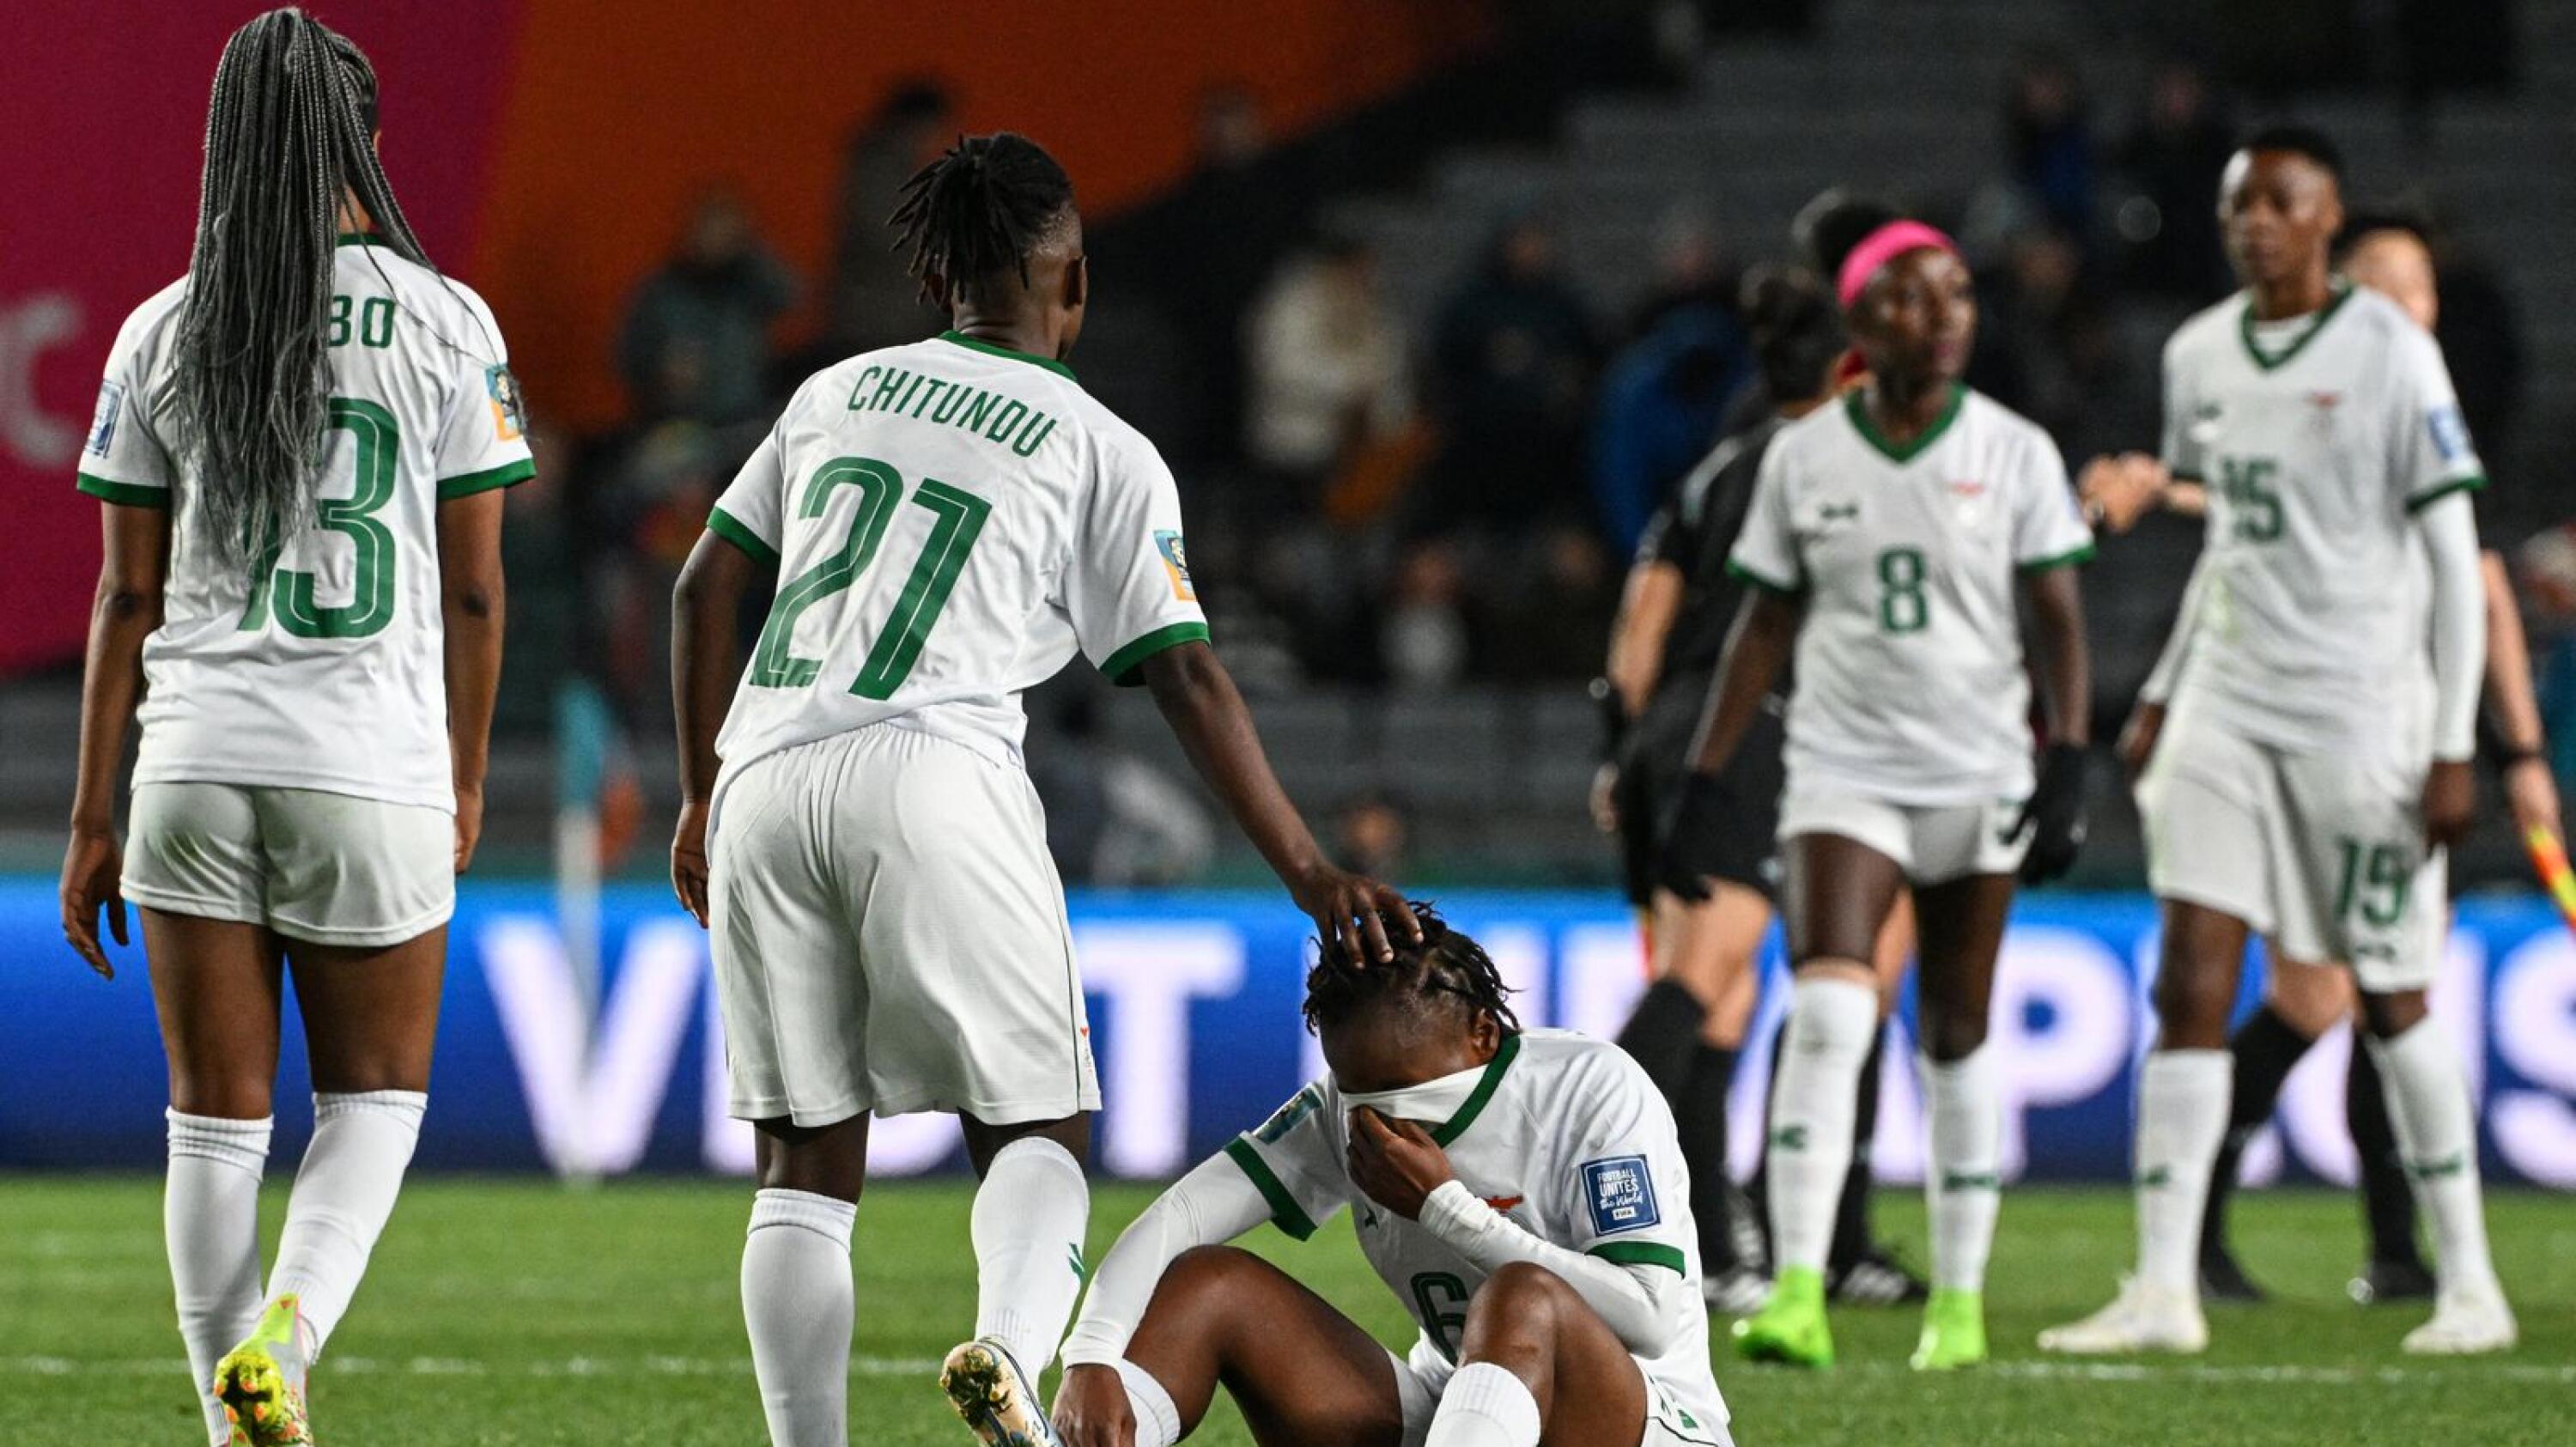 Zambia's midfielder Mary Wilombe (centre) is comforted after losing against Spain in their  Women's World Cup Group C football match at Eden Park in Auckland